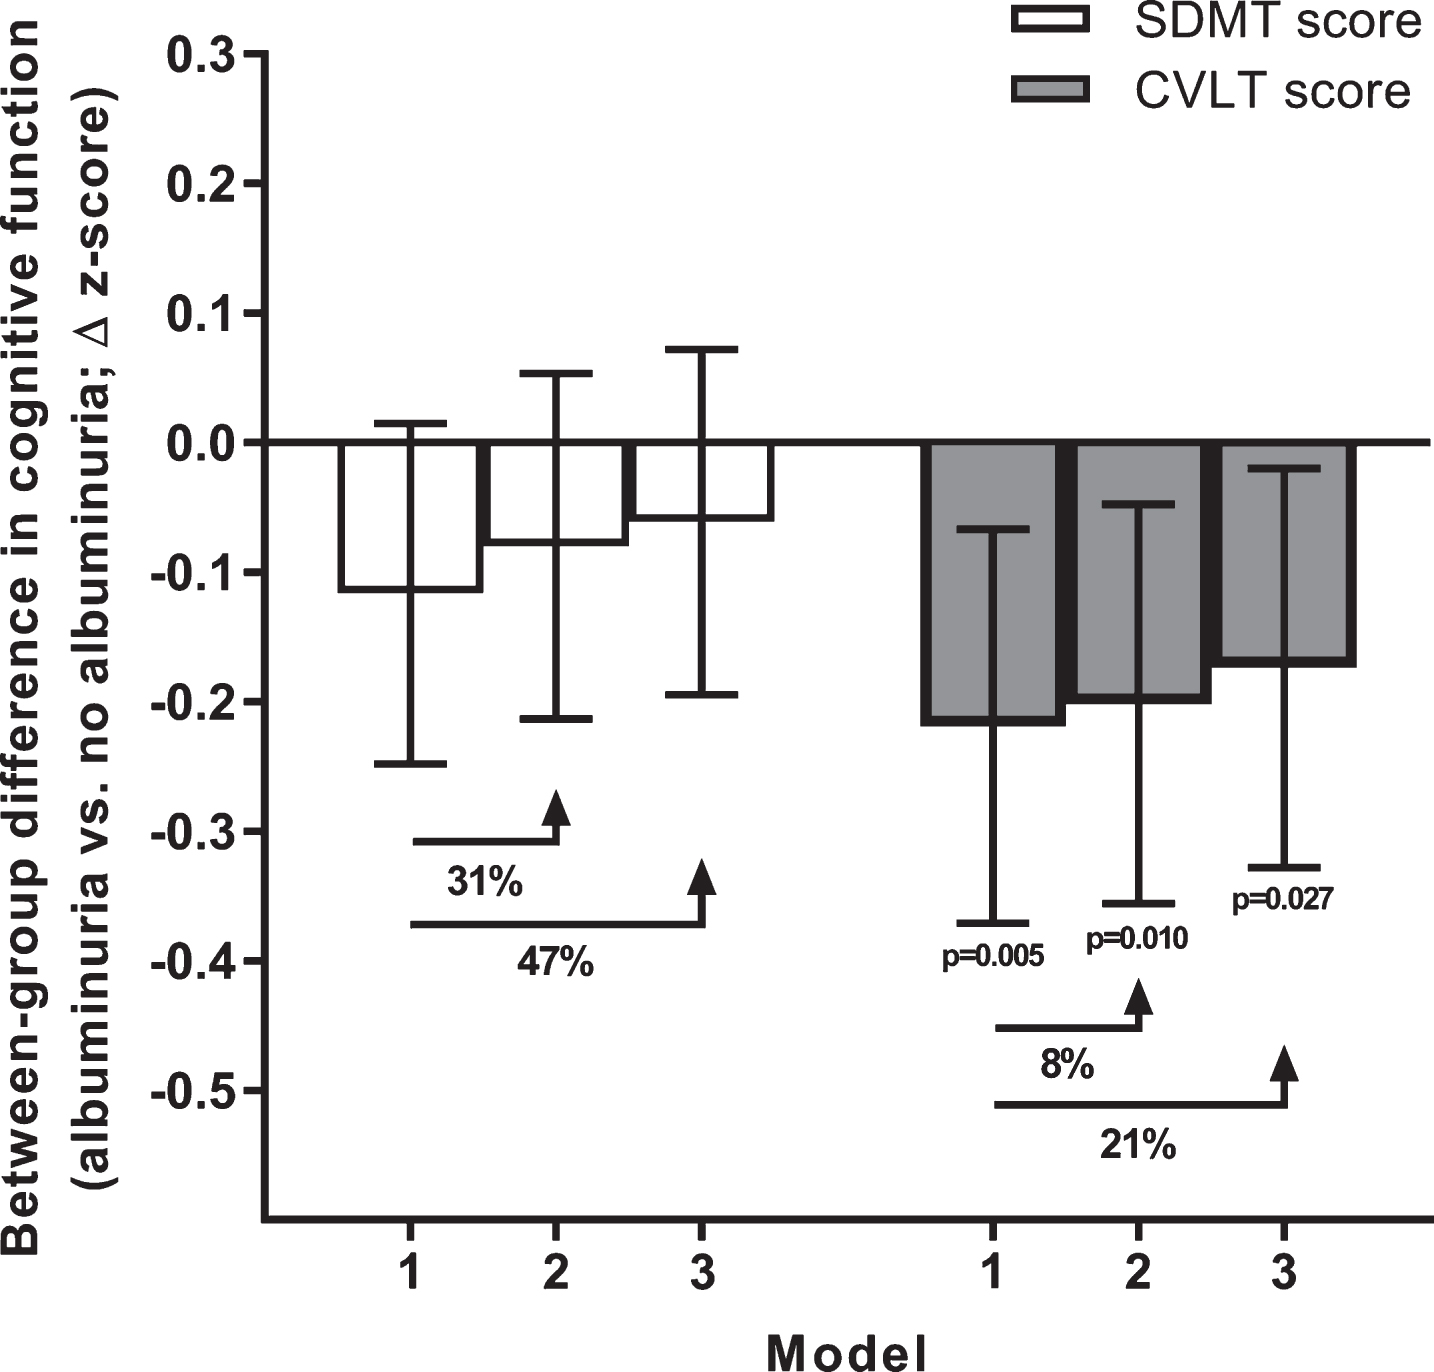 Albuminuria and cognitive function measured at 12 years of follow-up. Data are between-group differences in CVLT and SDMT z-scores measured at the 2011/12 follow-up. All data are estimated marginal means with 95% confidence intervals (error bars). Error bars crossing the zero line indicate no significant difference between individuals with versus without albuminuria (p > 0.05). Models 1 to 3 reflect incremental adjustment for a progressively more covariates; i.e., Model 1 featured age, sex, and education level only; Model 2: Model 1 covariates + atherosclerotic cardiovascular disease, hypertension and diabetes; Model 3: Model 2 covariates + body mass index, physical activity, smoking, alcohol intake, and dyslipidemia. The percentage values indicate the proportion of the effect of albuminuria mediated by these incrementally added covariates (i.e., beyond the Model 1 covariates of age, sex and education). CVLT, California Verbal Learning Test; SDMT, Symbol Digit Modalities Test.